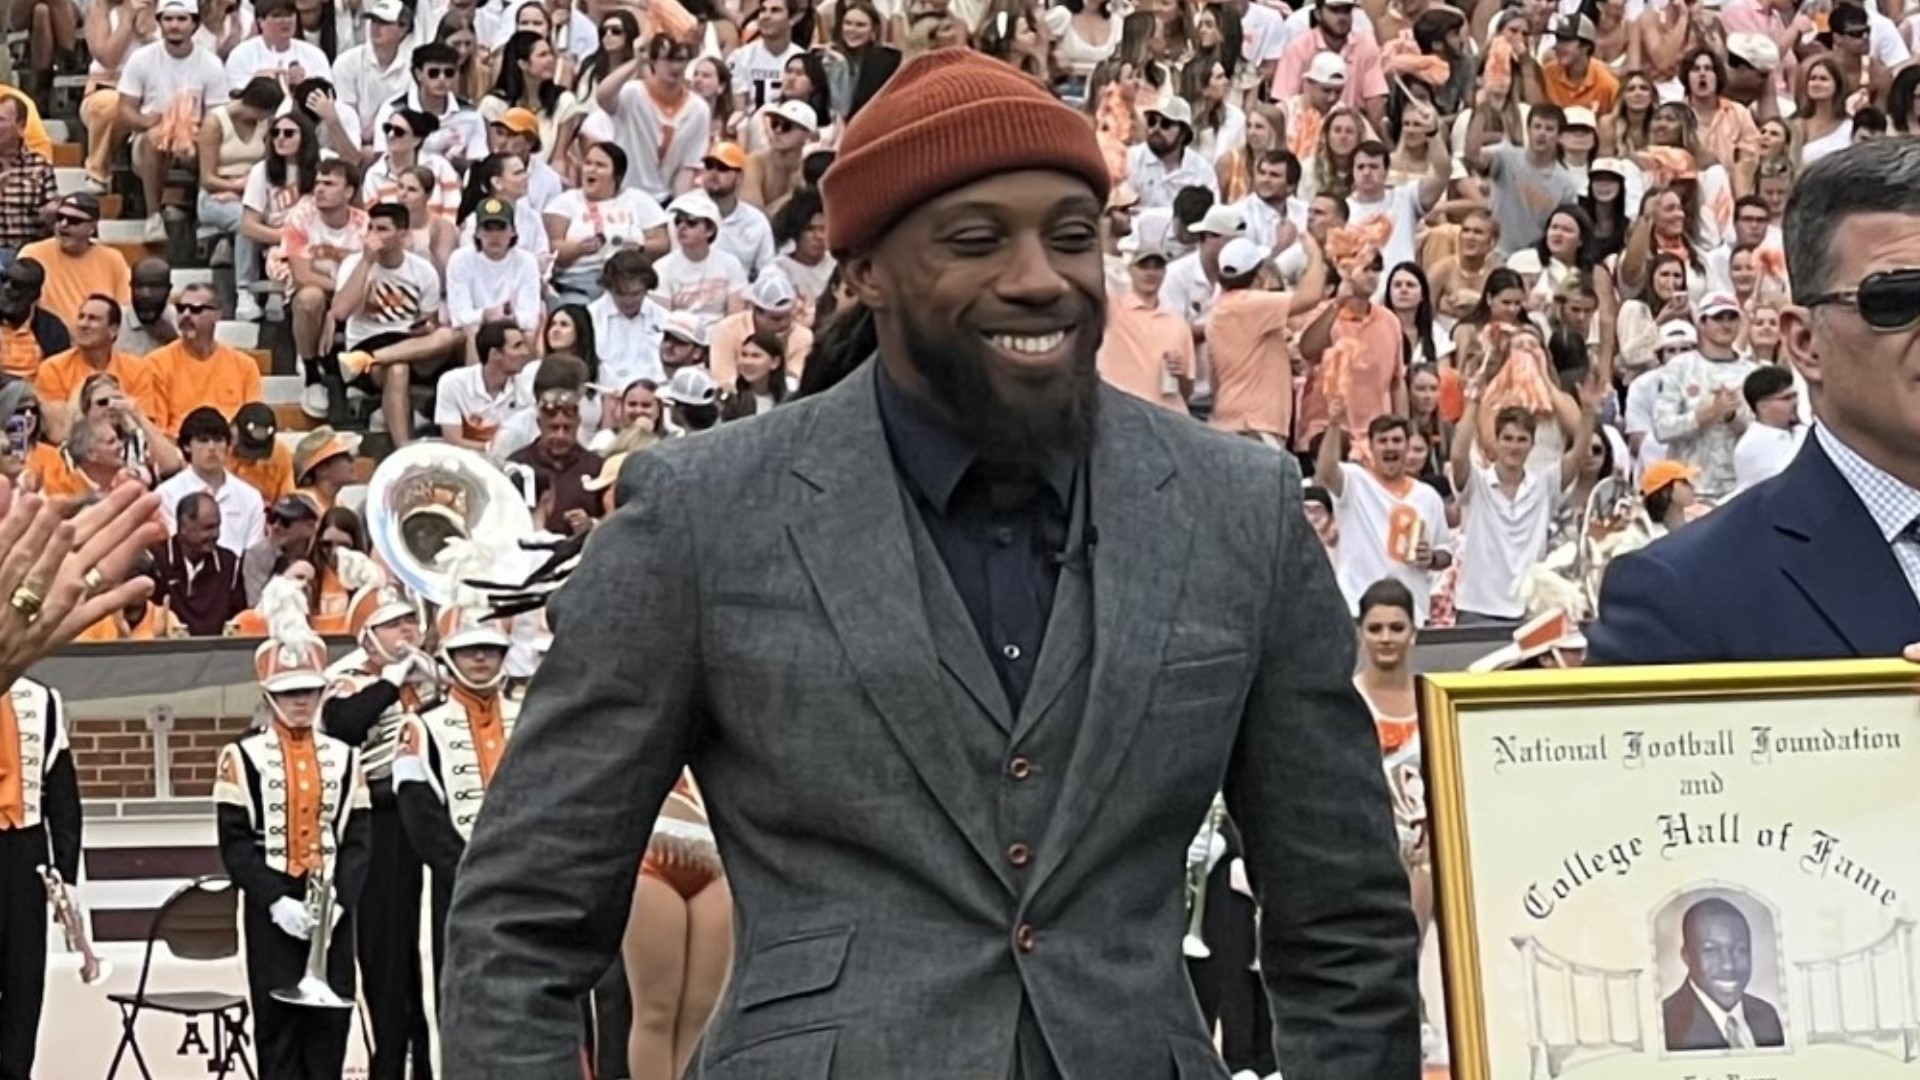 Former Tennessee safety Eric Berry was honored during halftime of the Texas A&M game ahead of his induction into the College Football Hall of Fame.